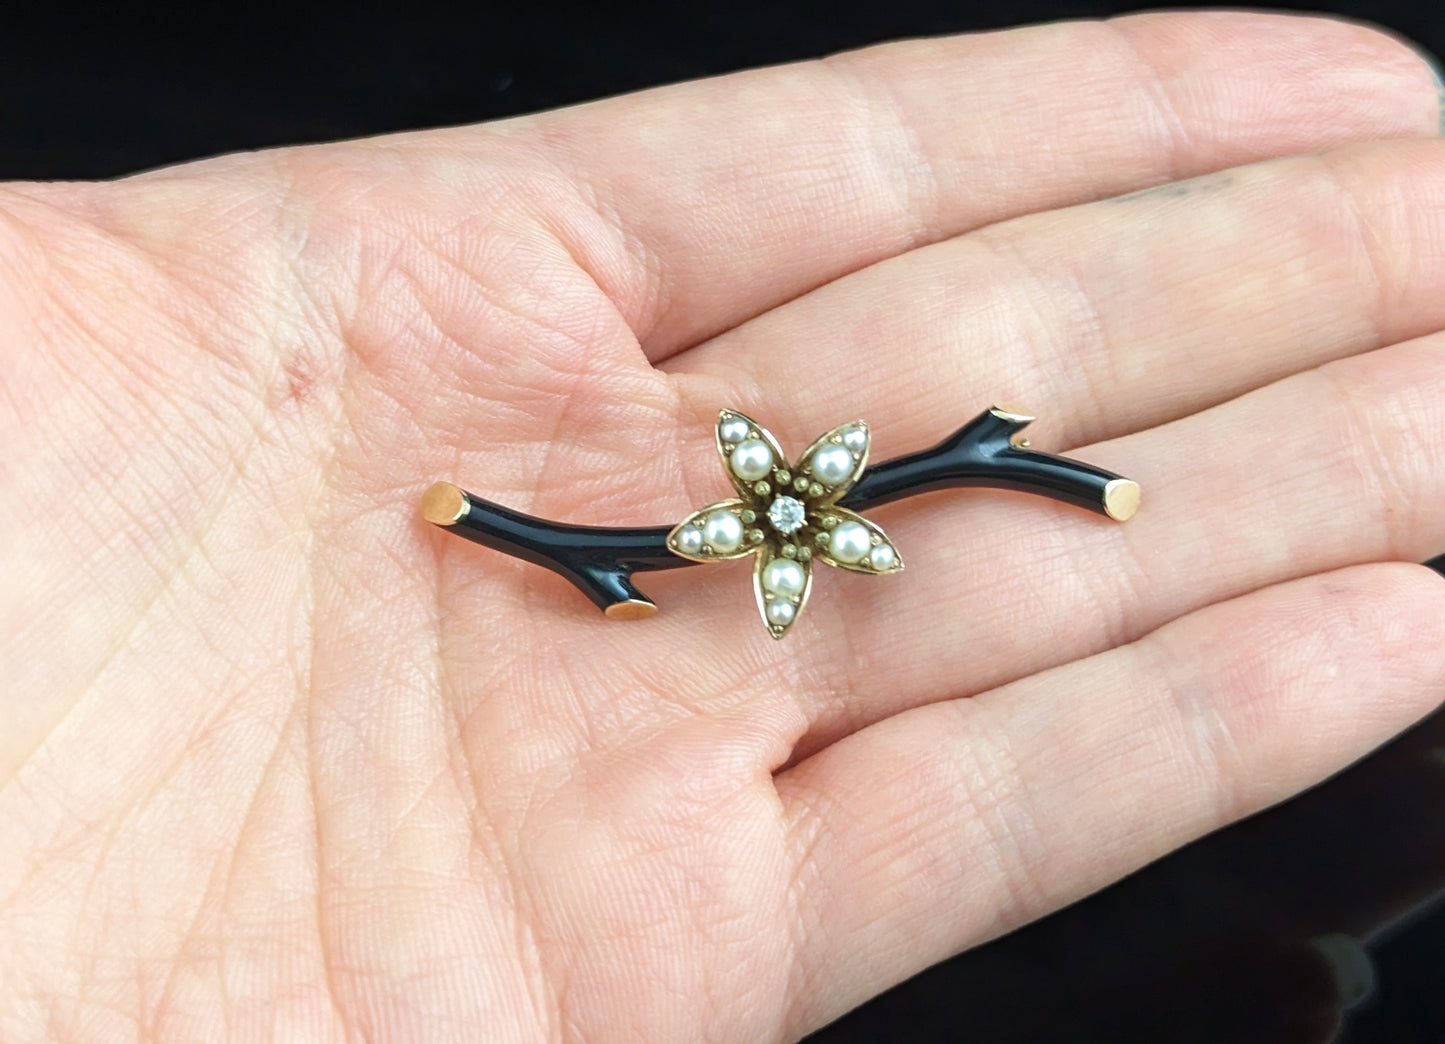 Antique mourning brooch, Diamond and pearl flower, black enamel, 15ct gold